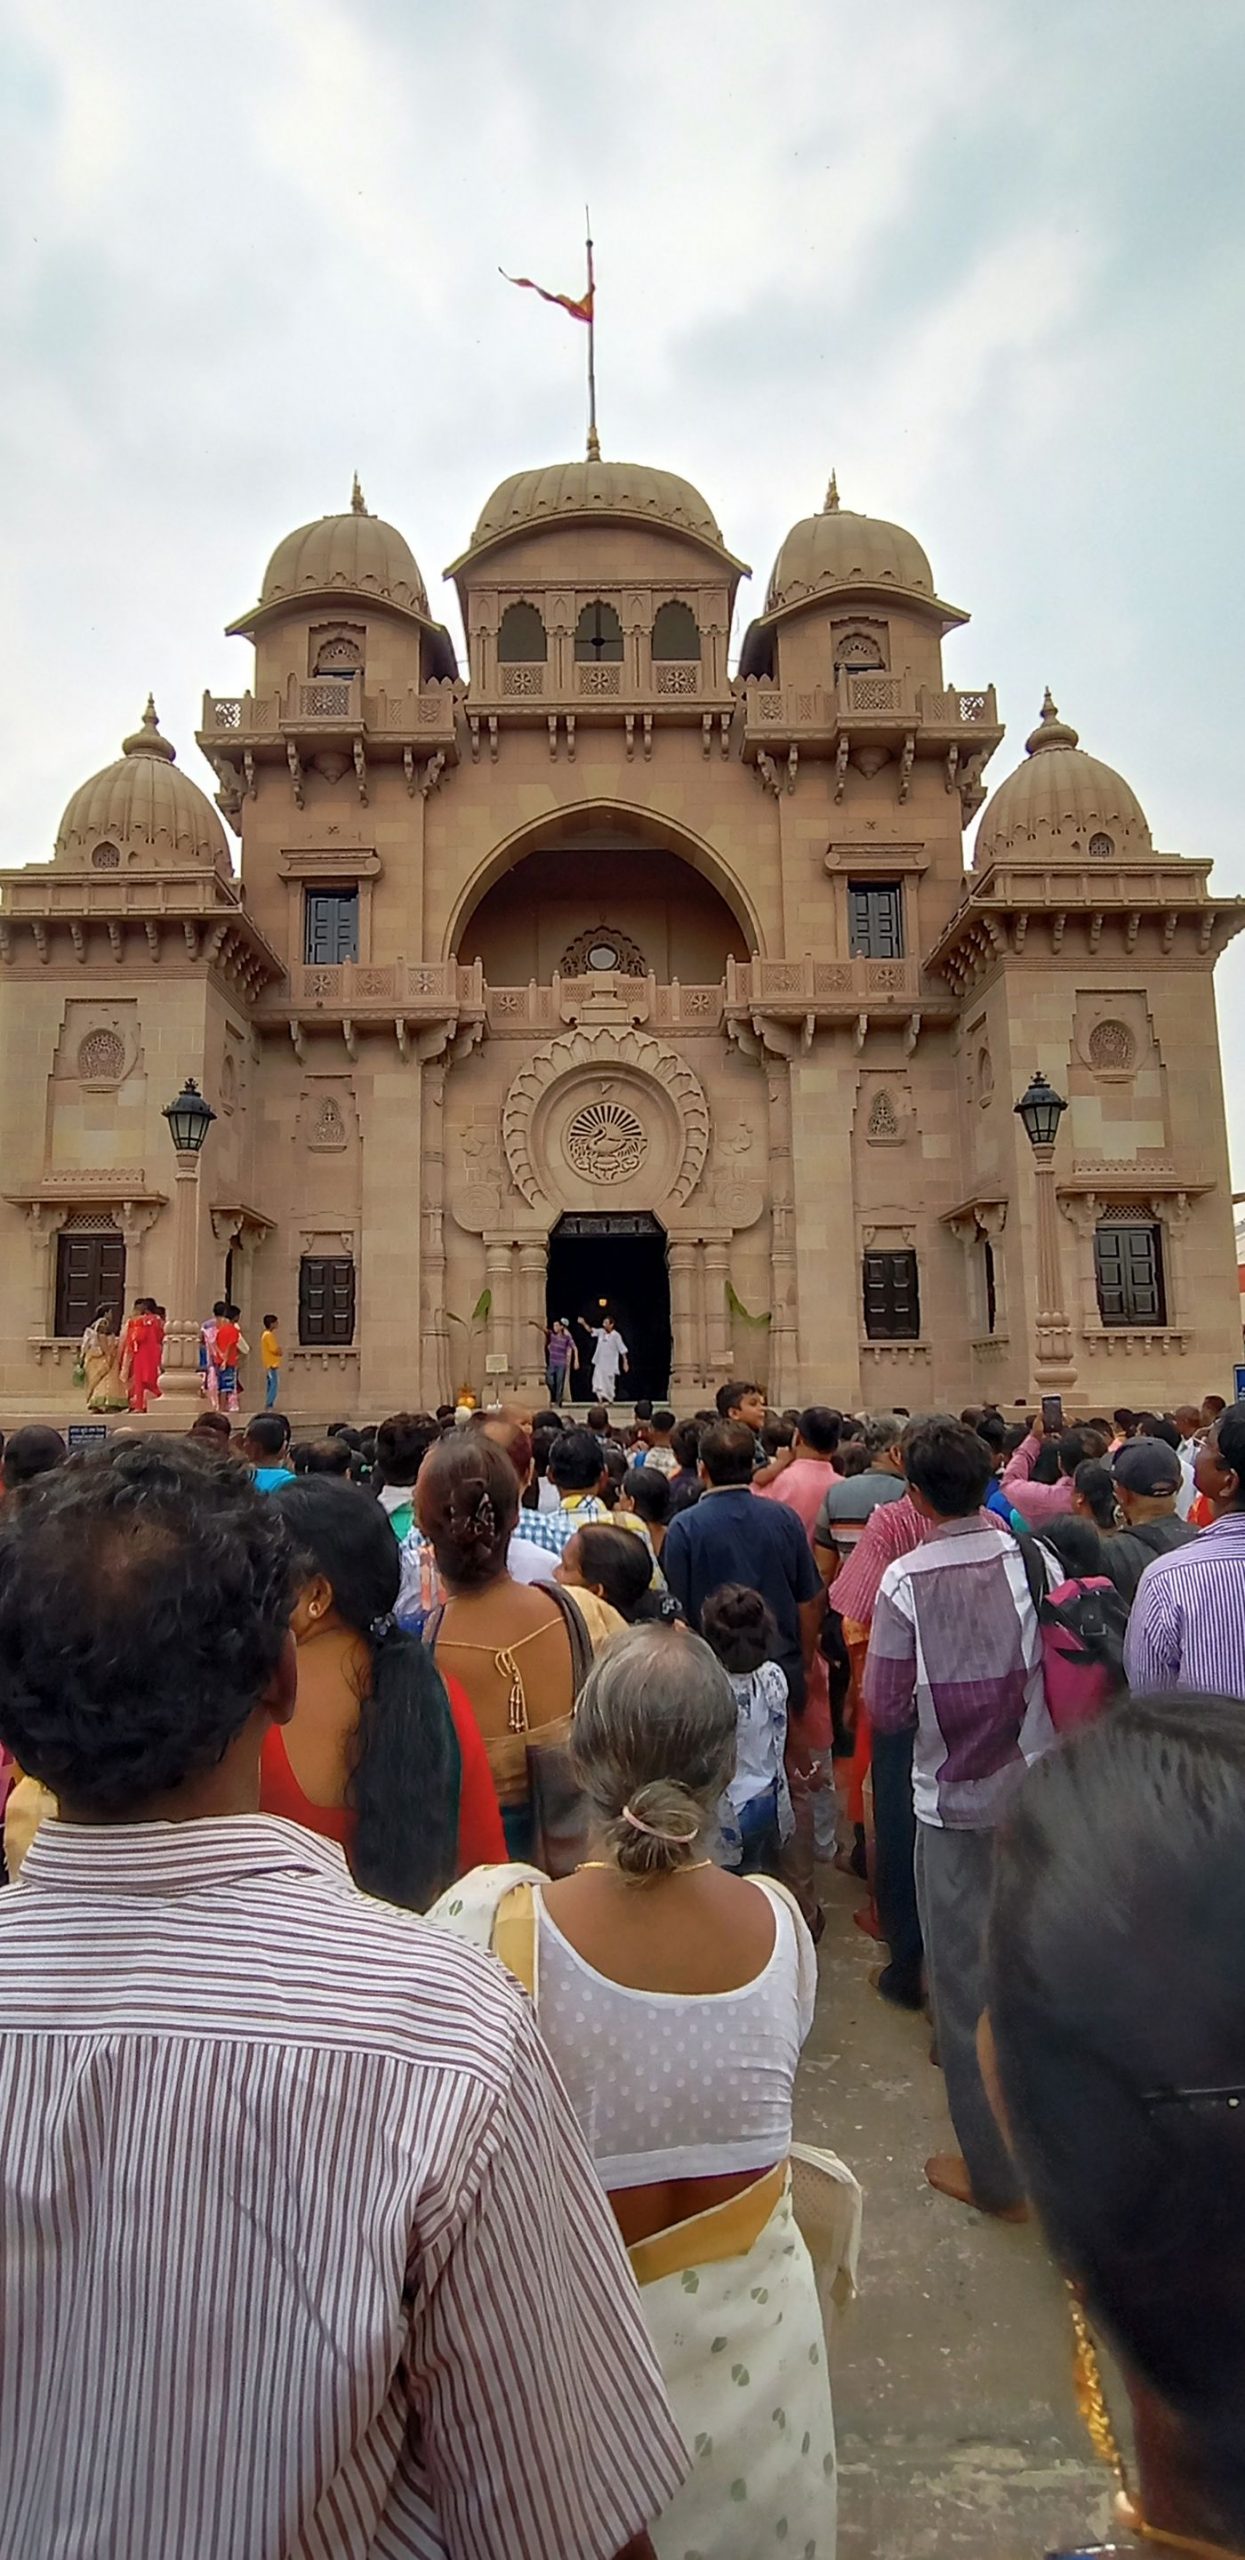 Visitors to West Bengal’s Belur Math, the Ramakrishna Math and Mission headquarters. The monastery was established by Swami Vivekananda